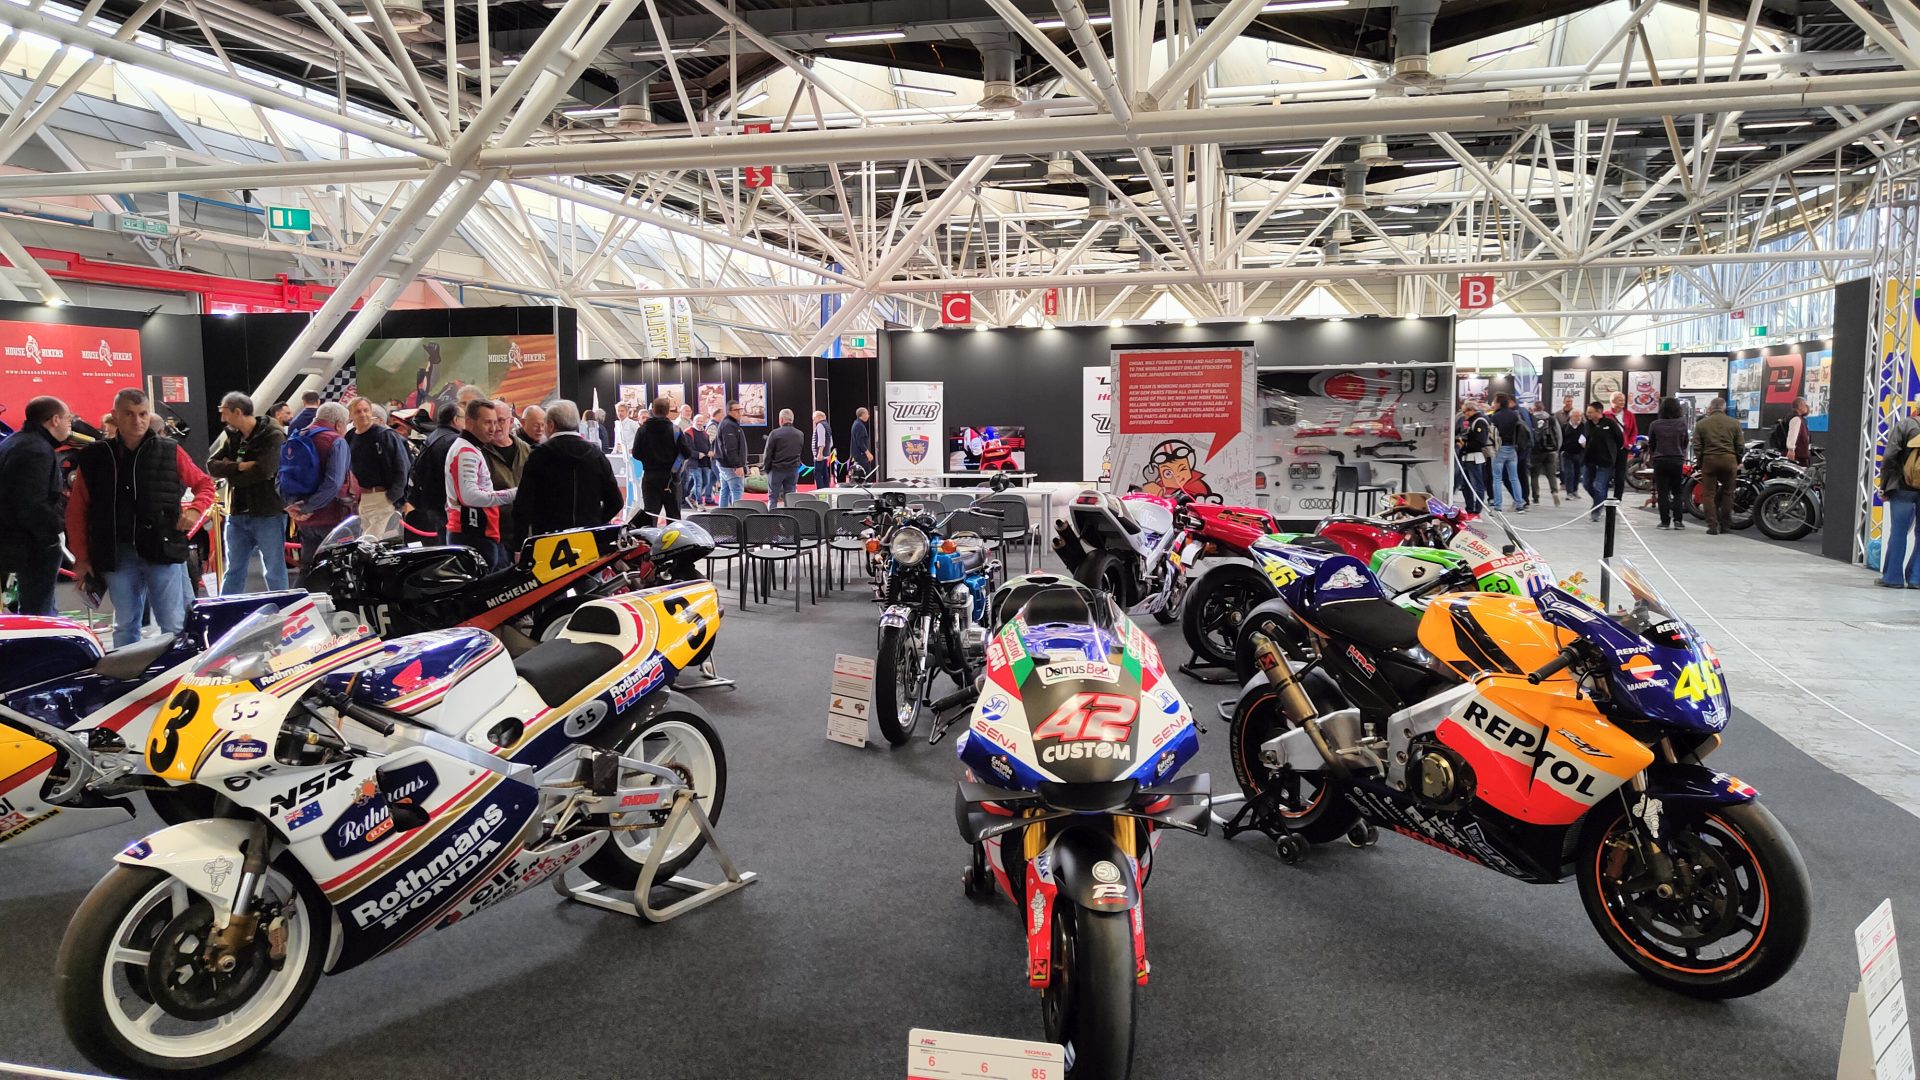 CMSNL, LCR HONDA AND WCRB TOGETHER AT “AUTO E MOTO D’EPOCA”